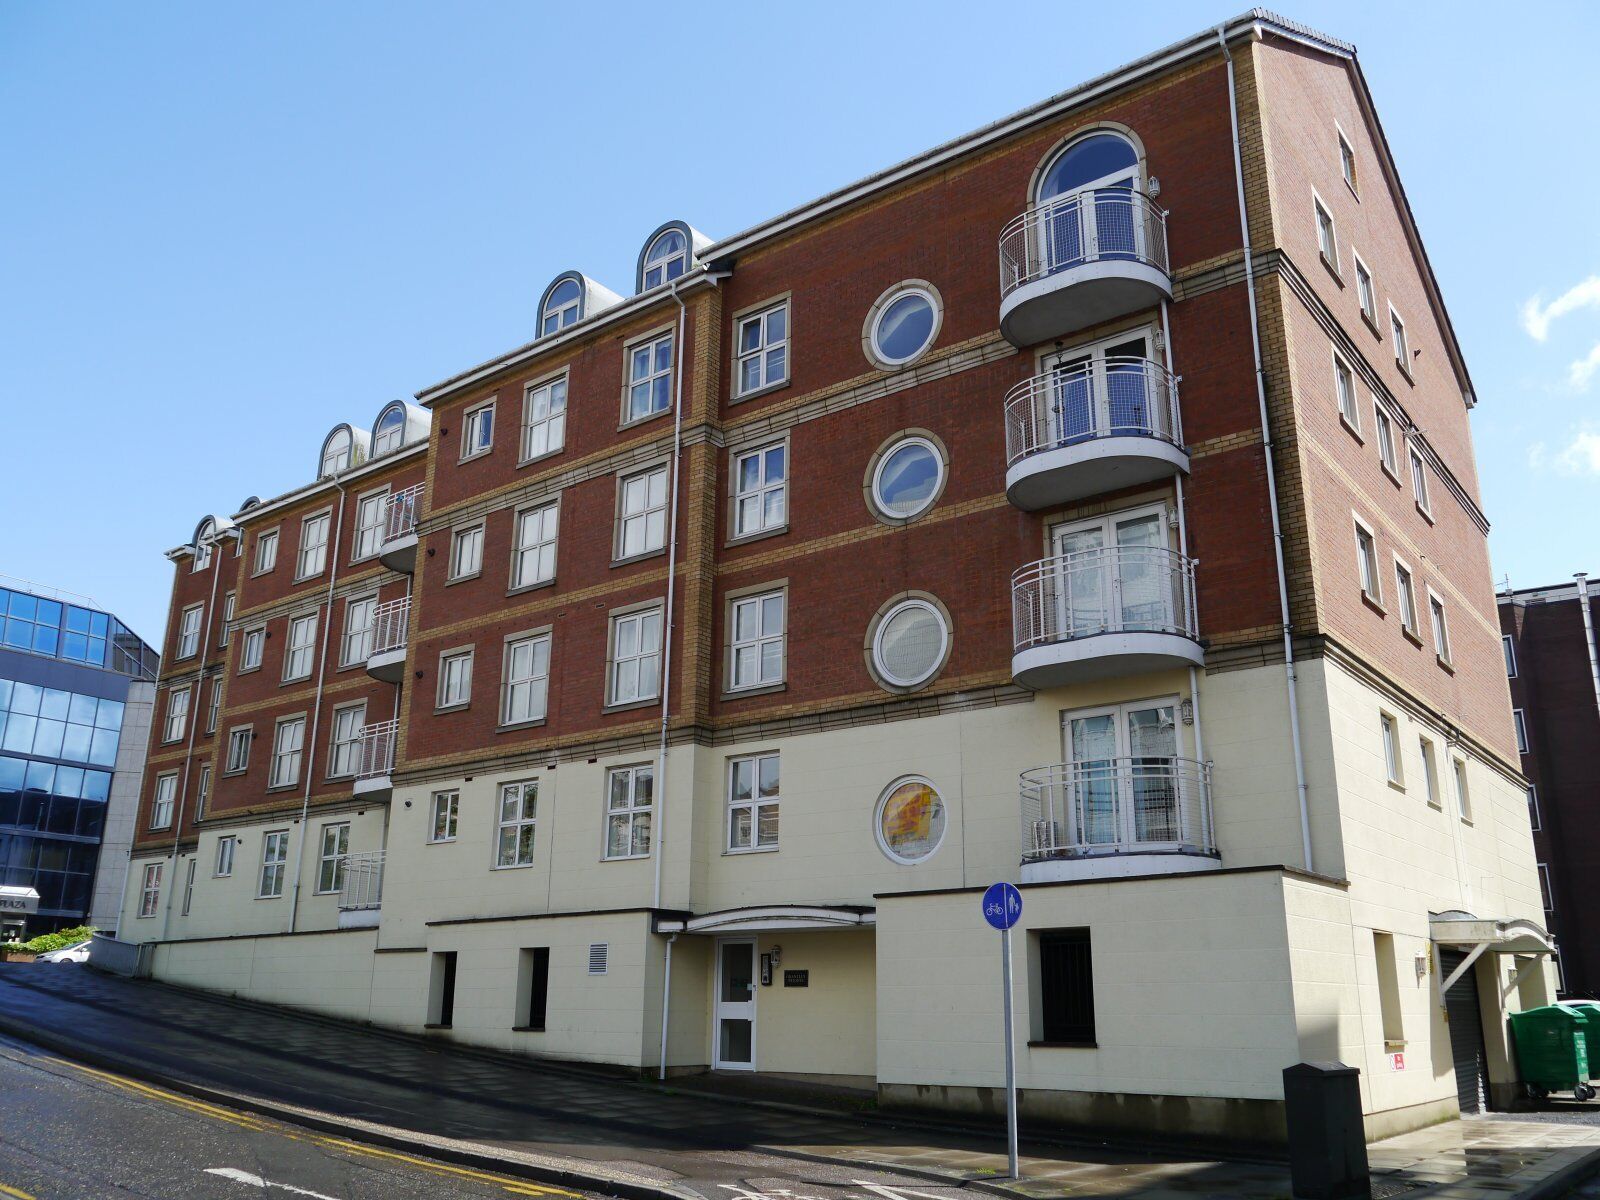 2 bedroom  flat to rent, Available now Kennet Side, Reading, RG1, main image